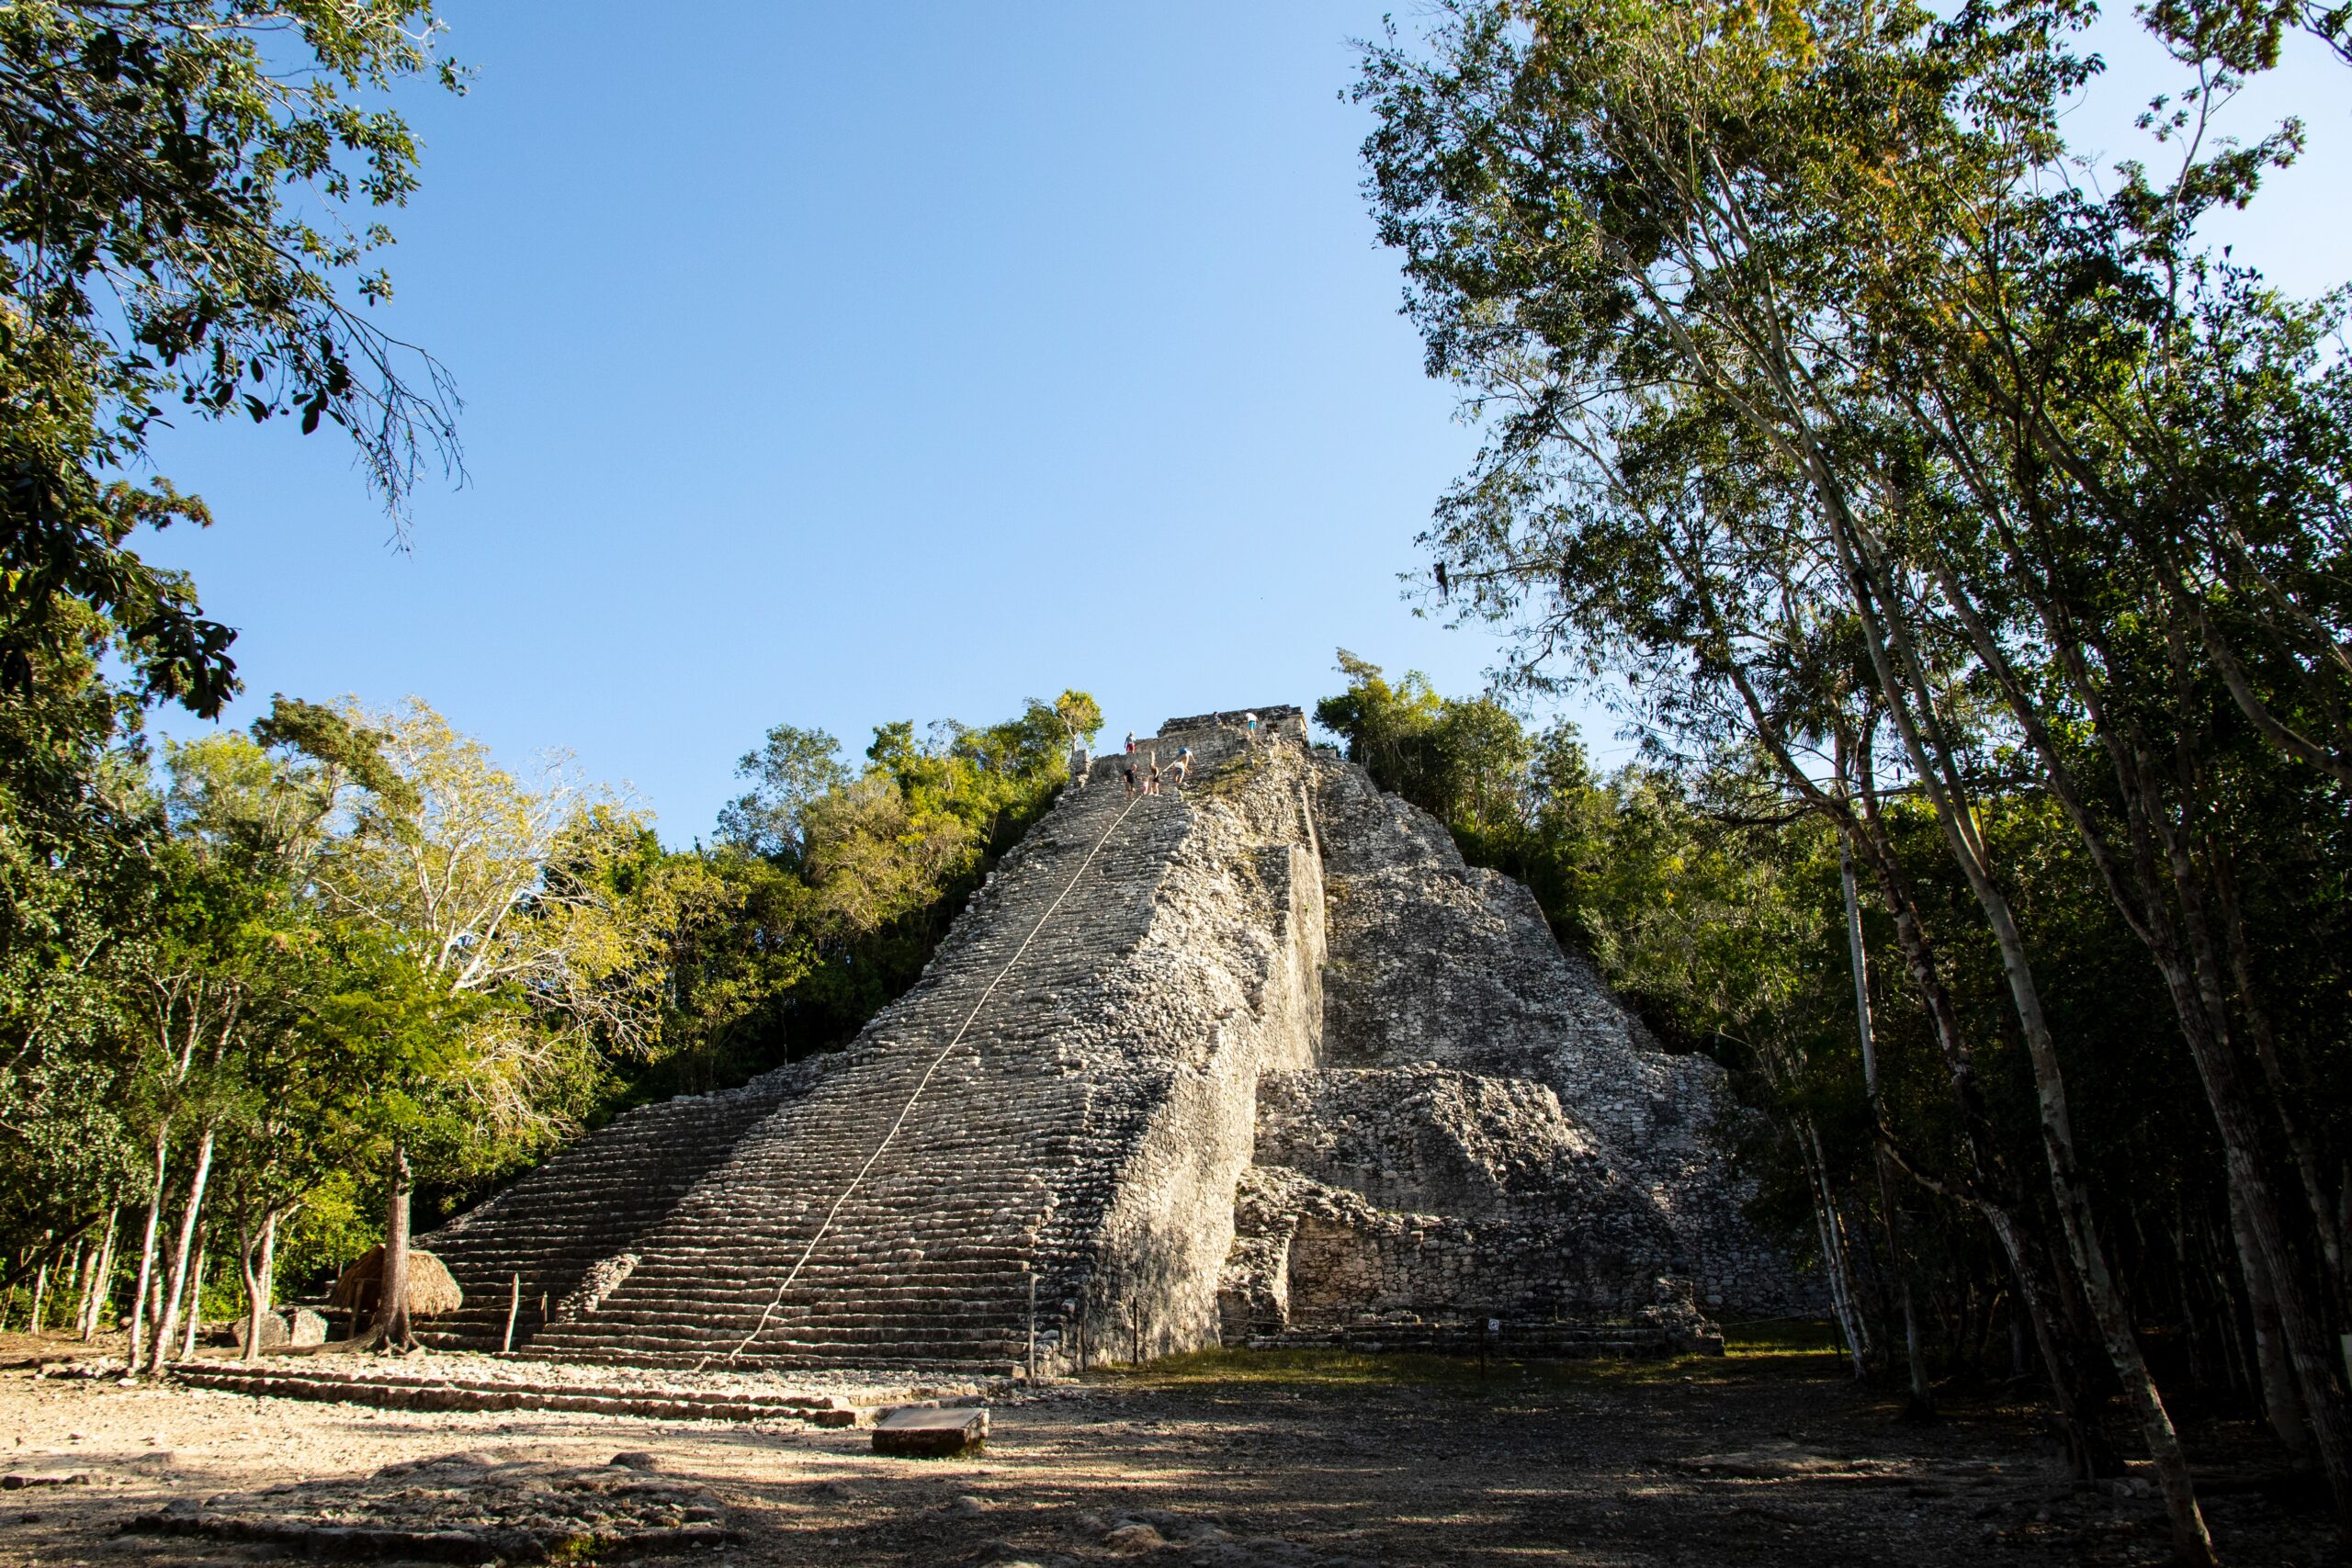 Ixmoja Pyramid in the Cobá ruins is climbable site. 
pictured: The Ixmoja Pyramid with a tethered rope descending the steps to help climbing tourists 